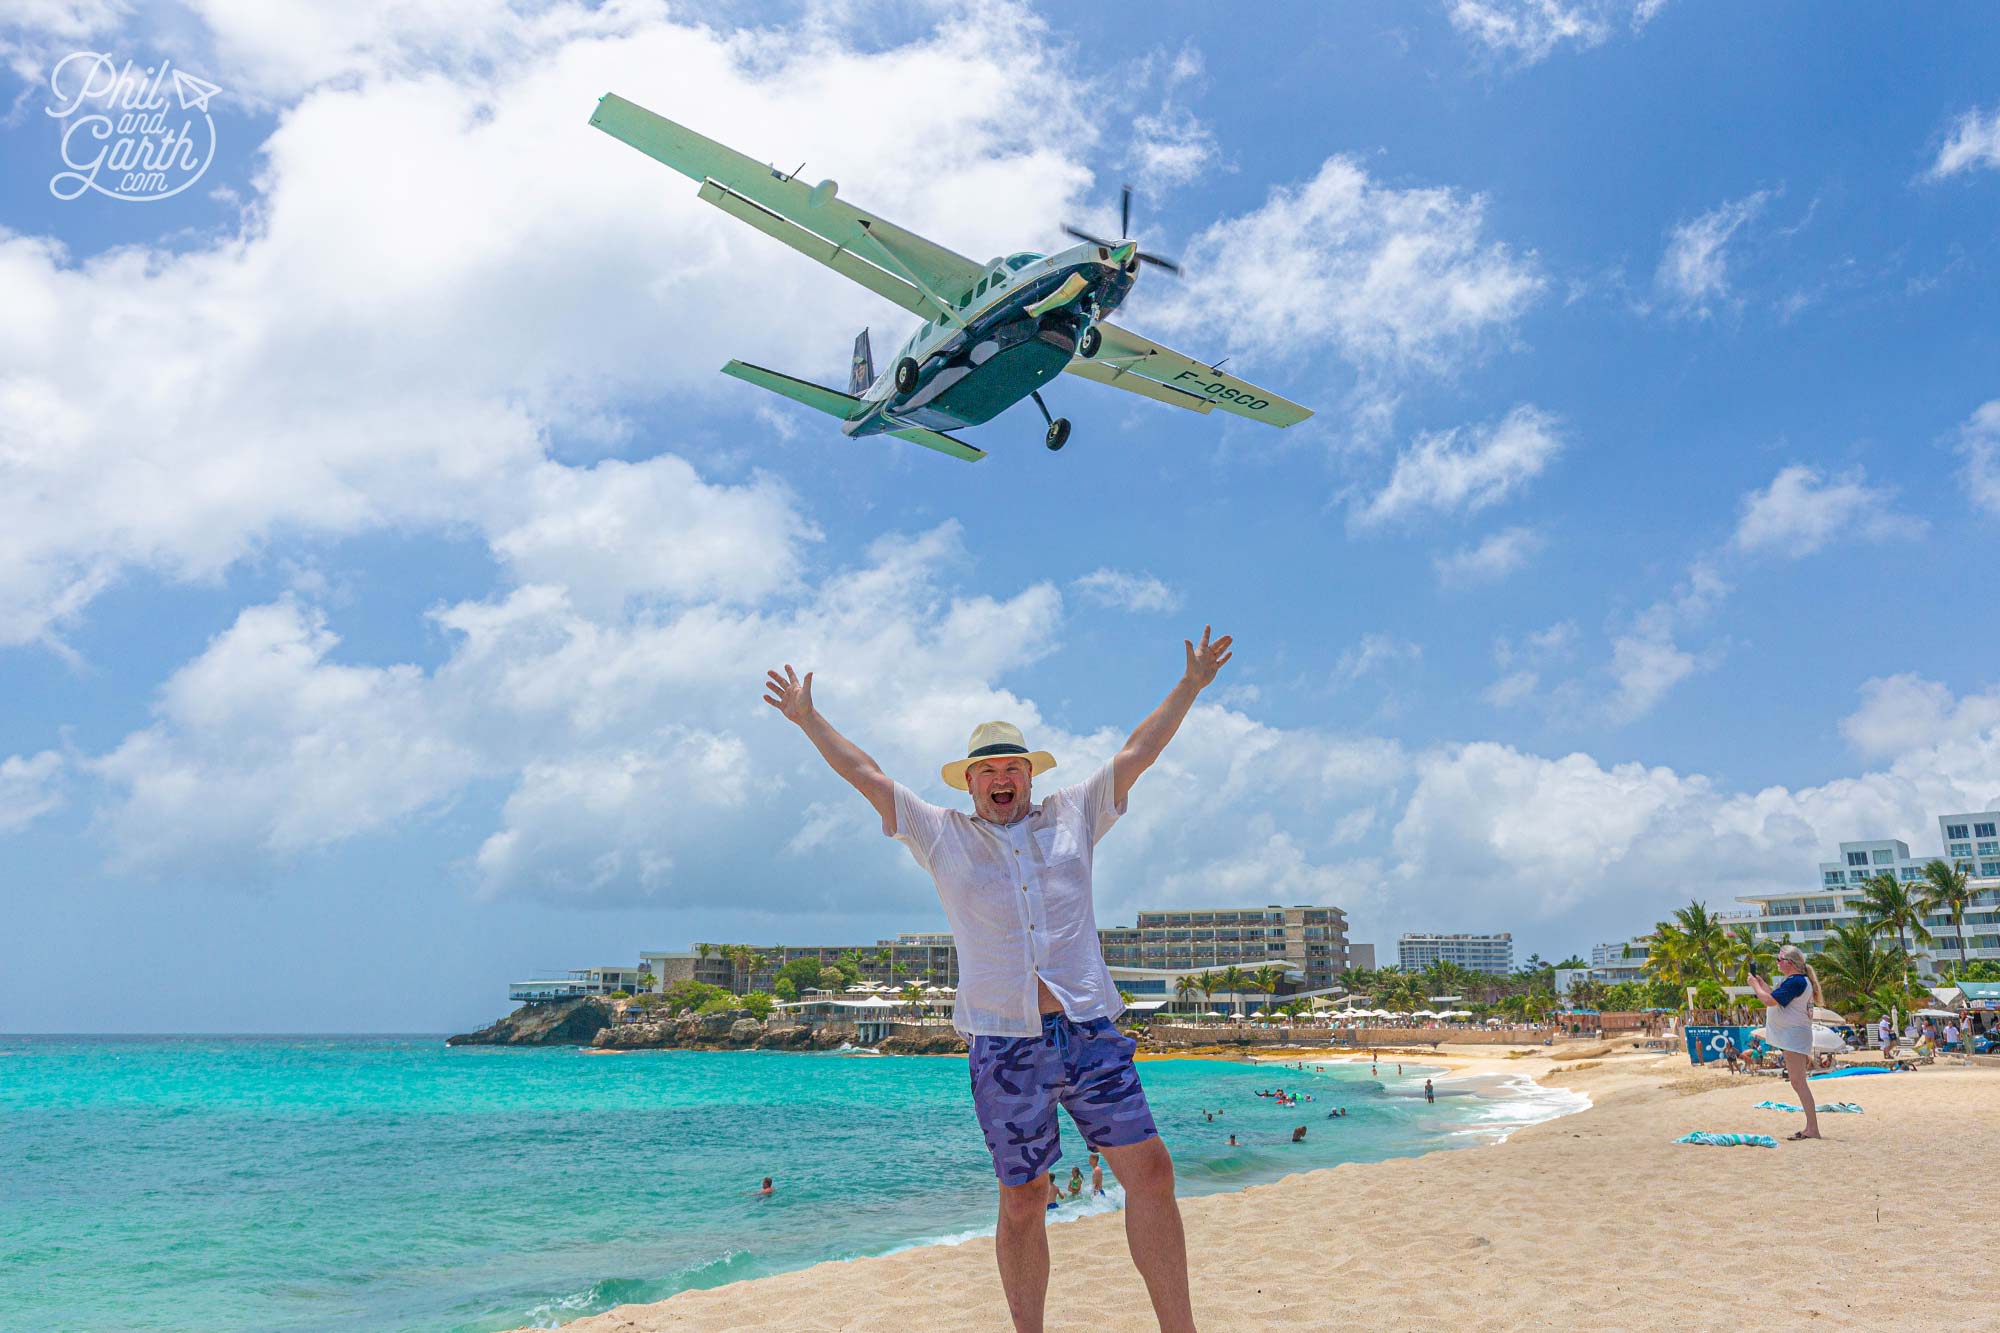 Phil on Maho Beach as a small plane comes into land